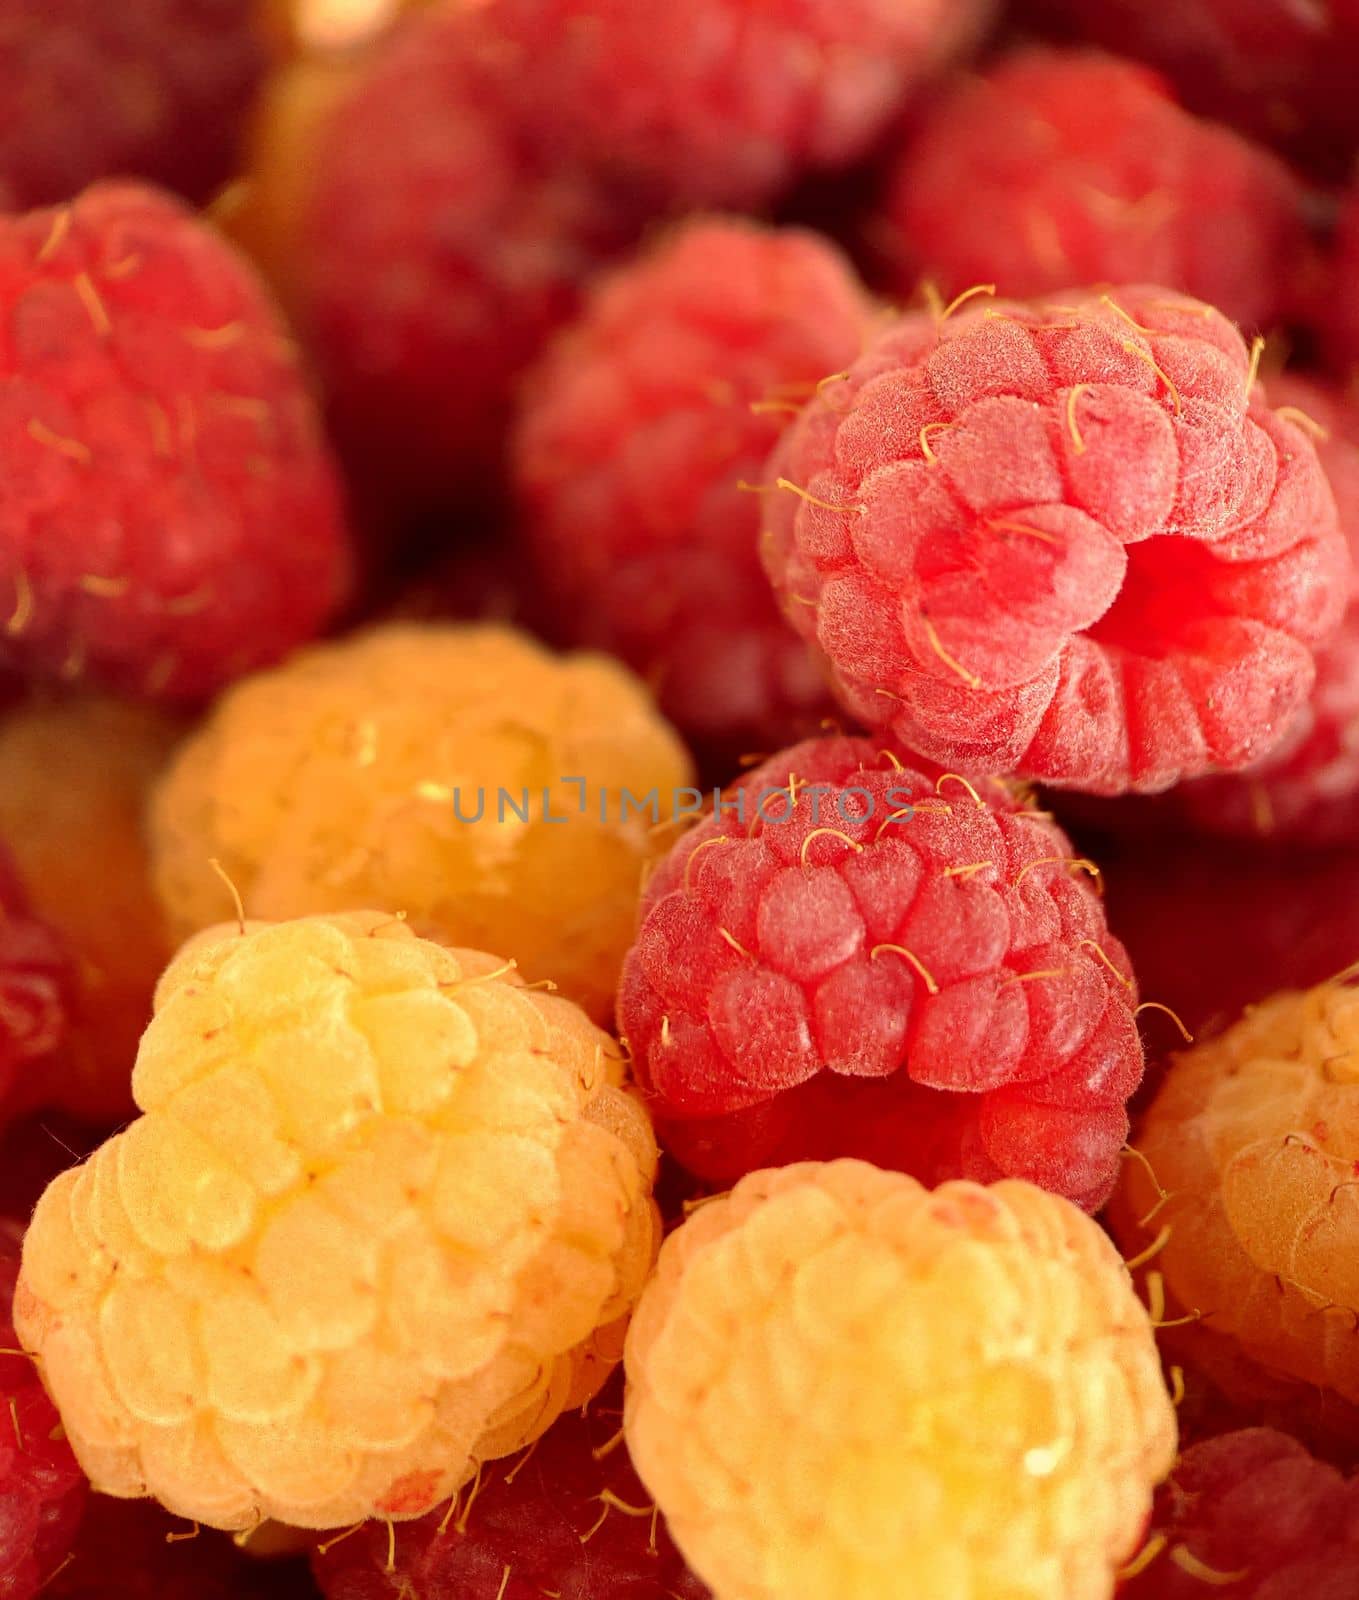 A bunch of ripe red and yellow raspberries selective focus by Mastak80